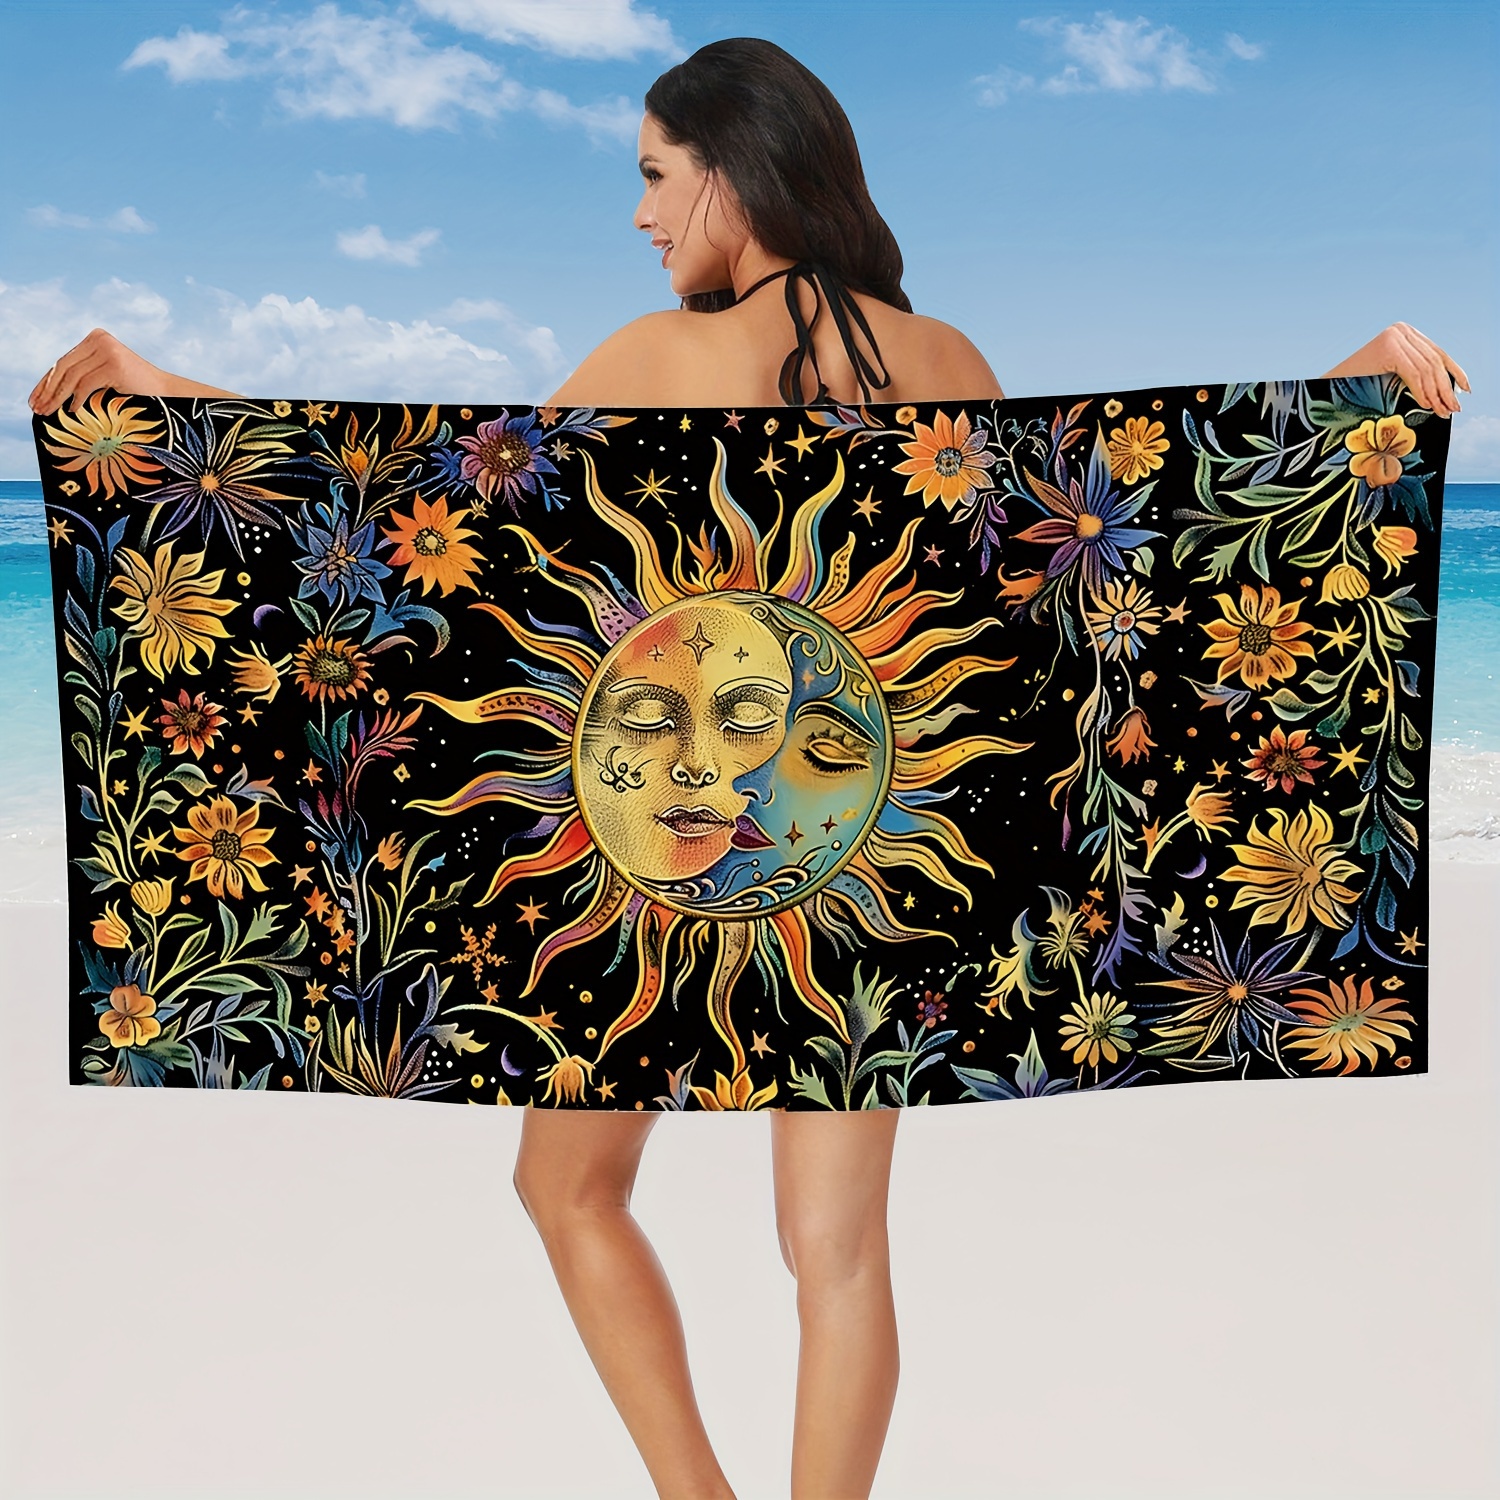 

1pc Sun And Moon Floral Microfiber Beach Towel, Psychedelic Hippie Oversized Beach Towel, Lightweight Sandproof Quick Drying Thin Absorbent Towel, Swimming Pool Camping Beach Accessory